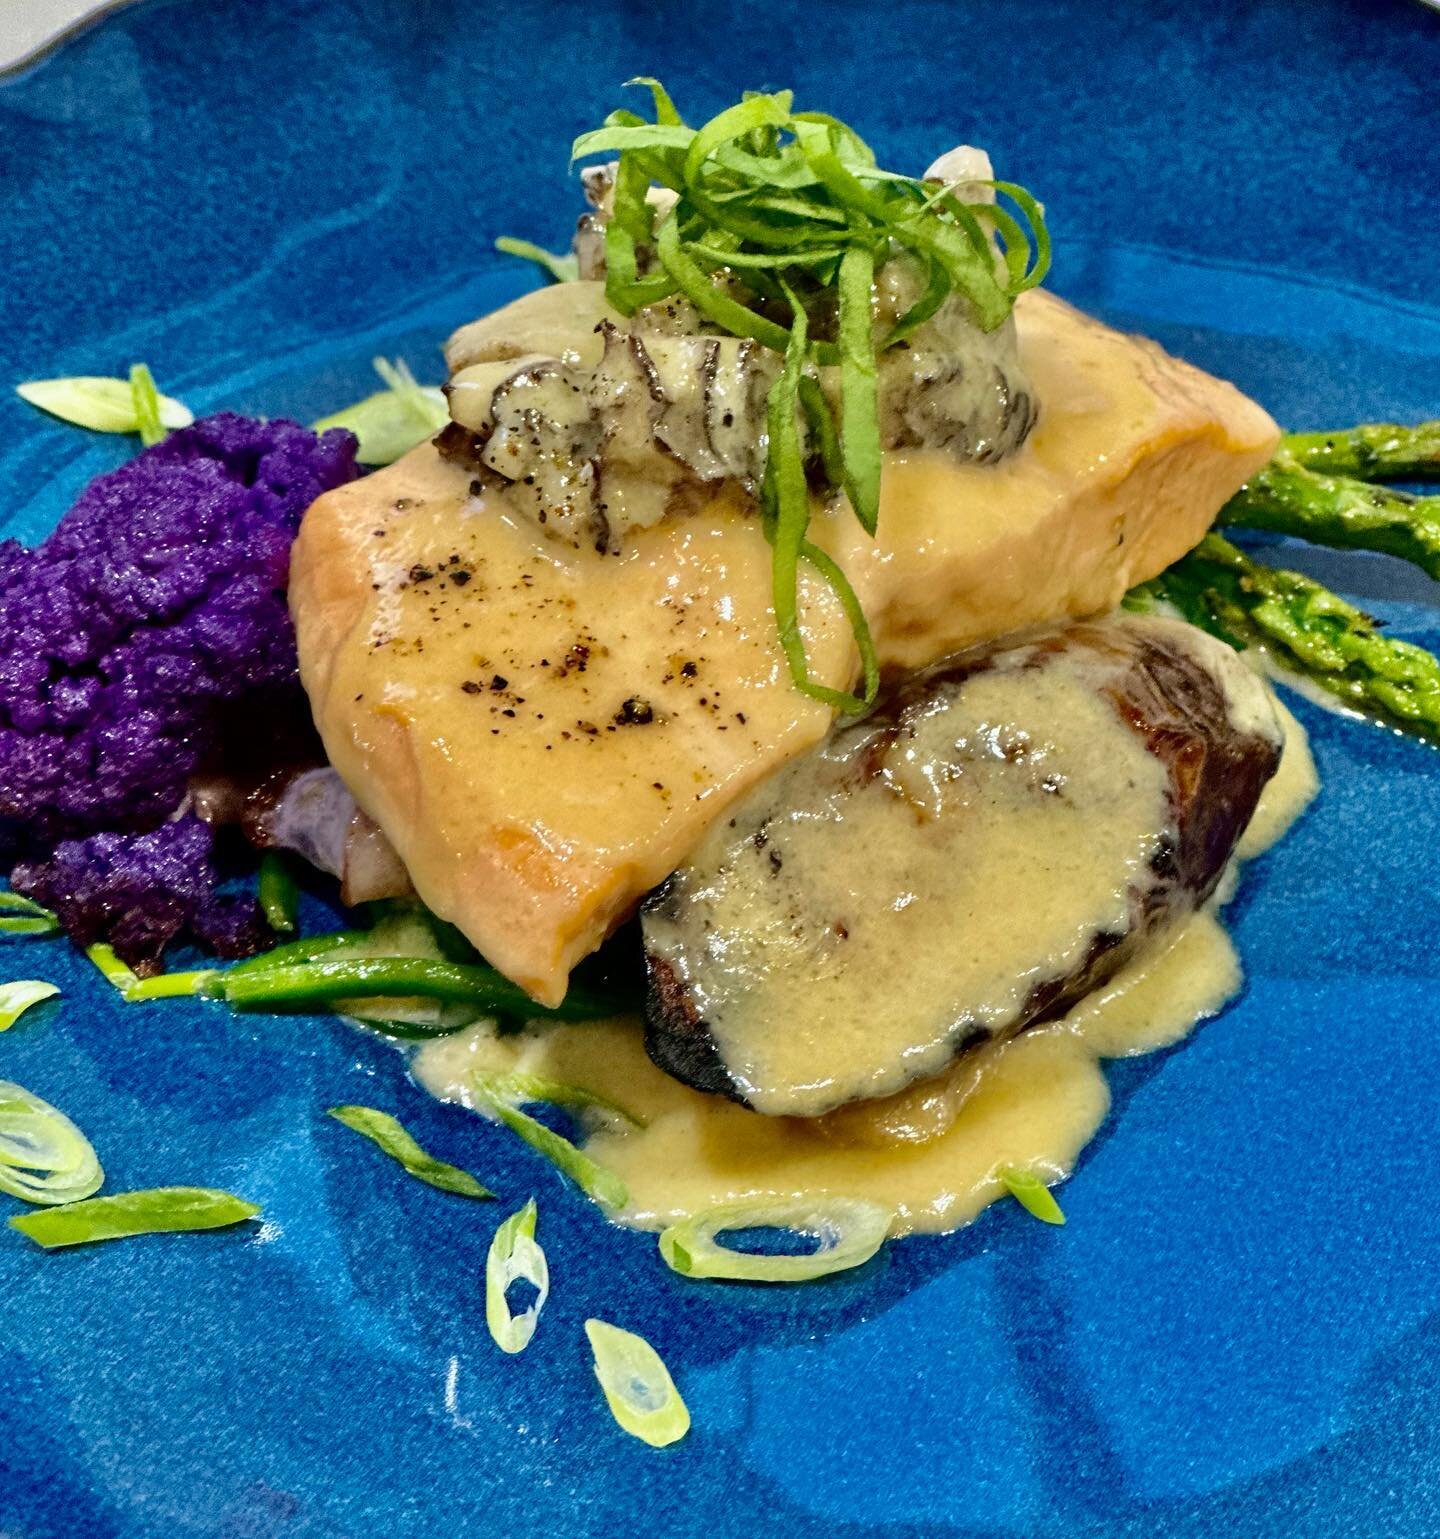 Our Featured Seafood Dinner of the Weekend, Salmon Troisgros, a Chinook Salmon Filet,  Poached in a White Wine, Shallot, and Cr&egrave;me Fraiche Reduction. Served with Saut&eacute;ed Greens and Seared Local Mushrooms.
.
Open Wednesday to Sunday 5pm-